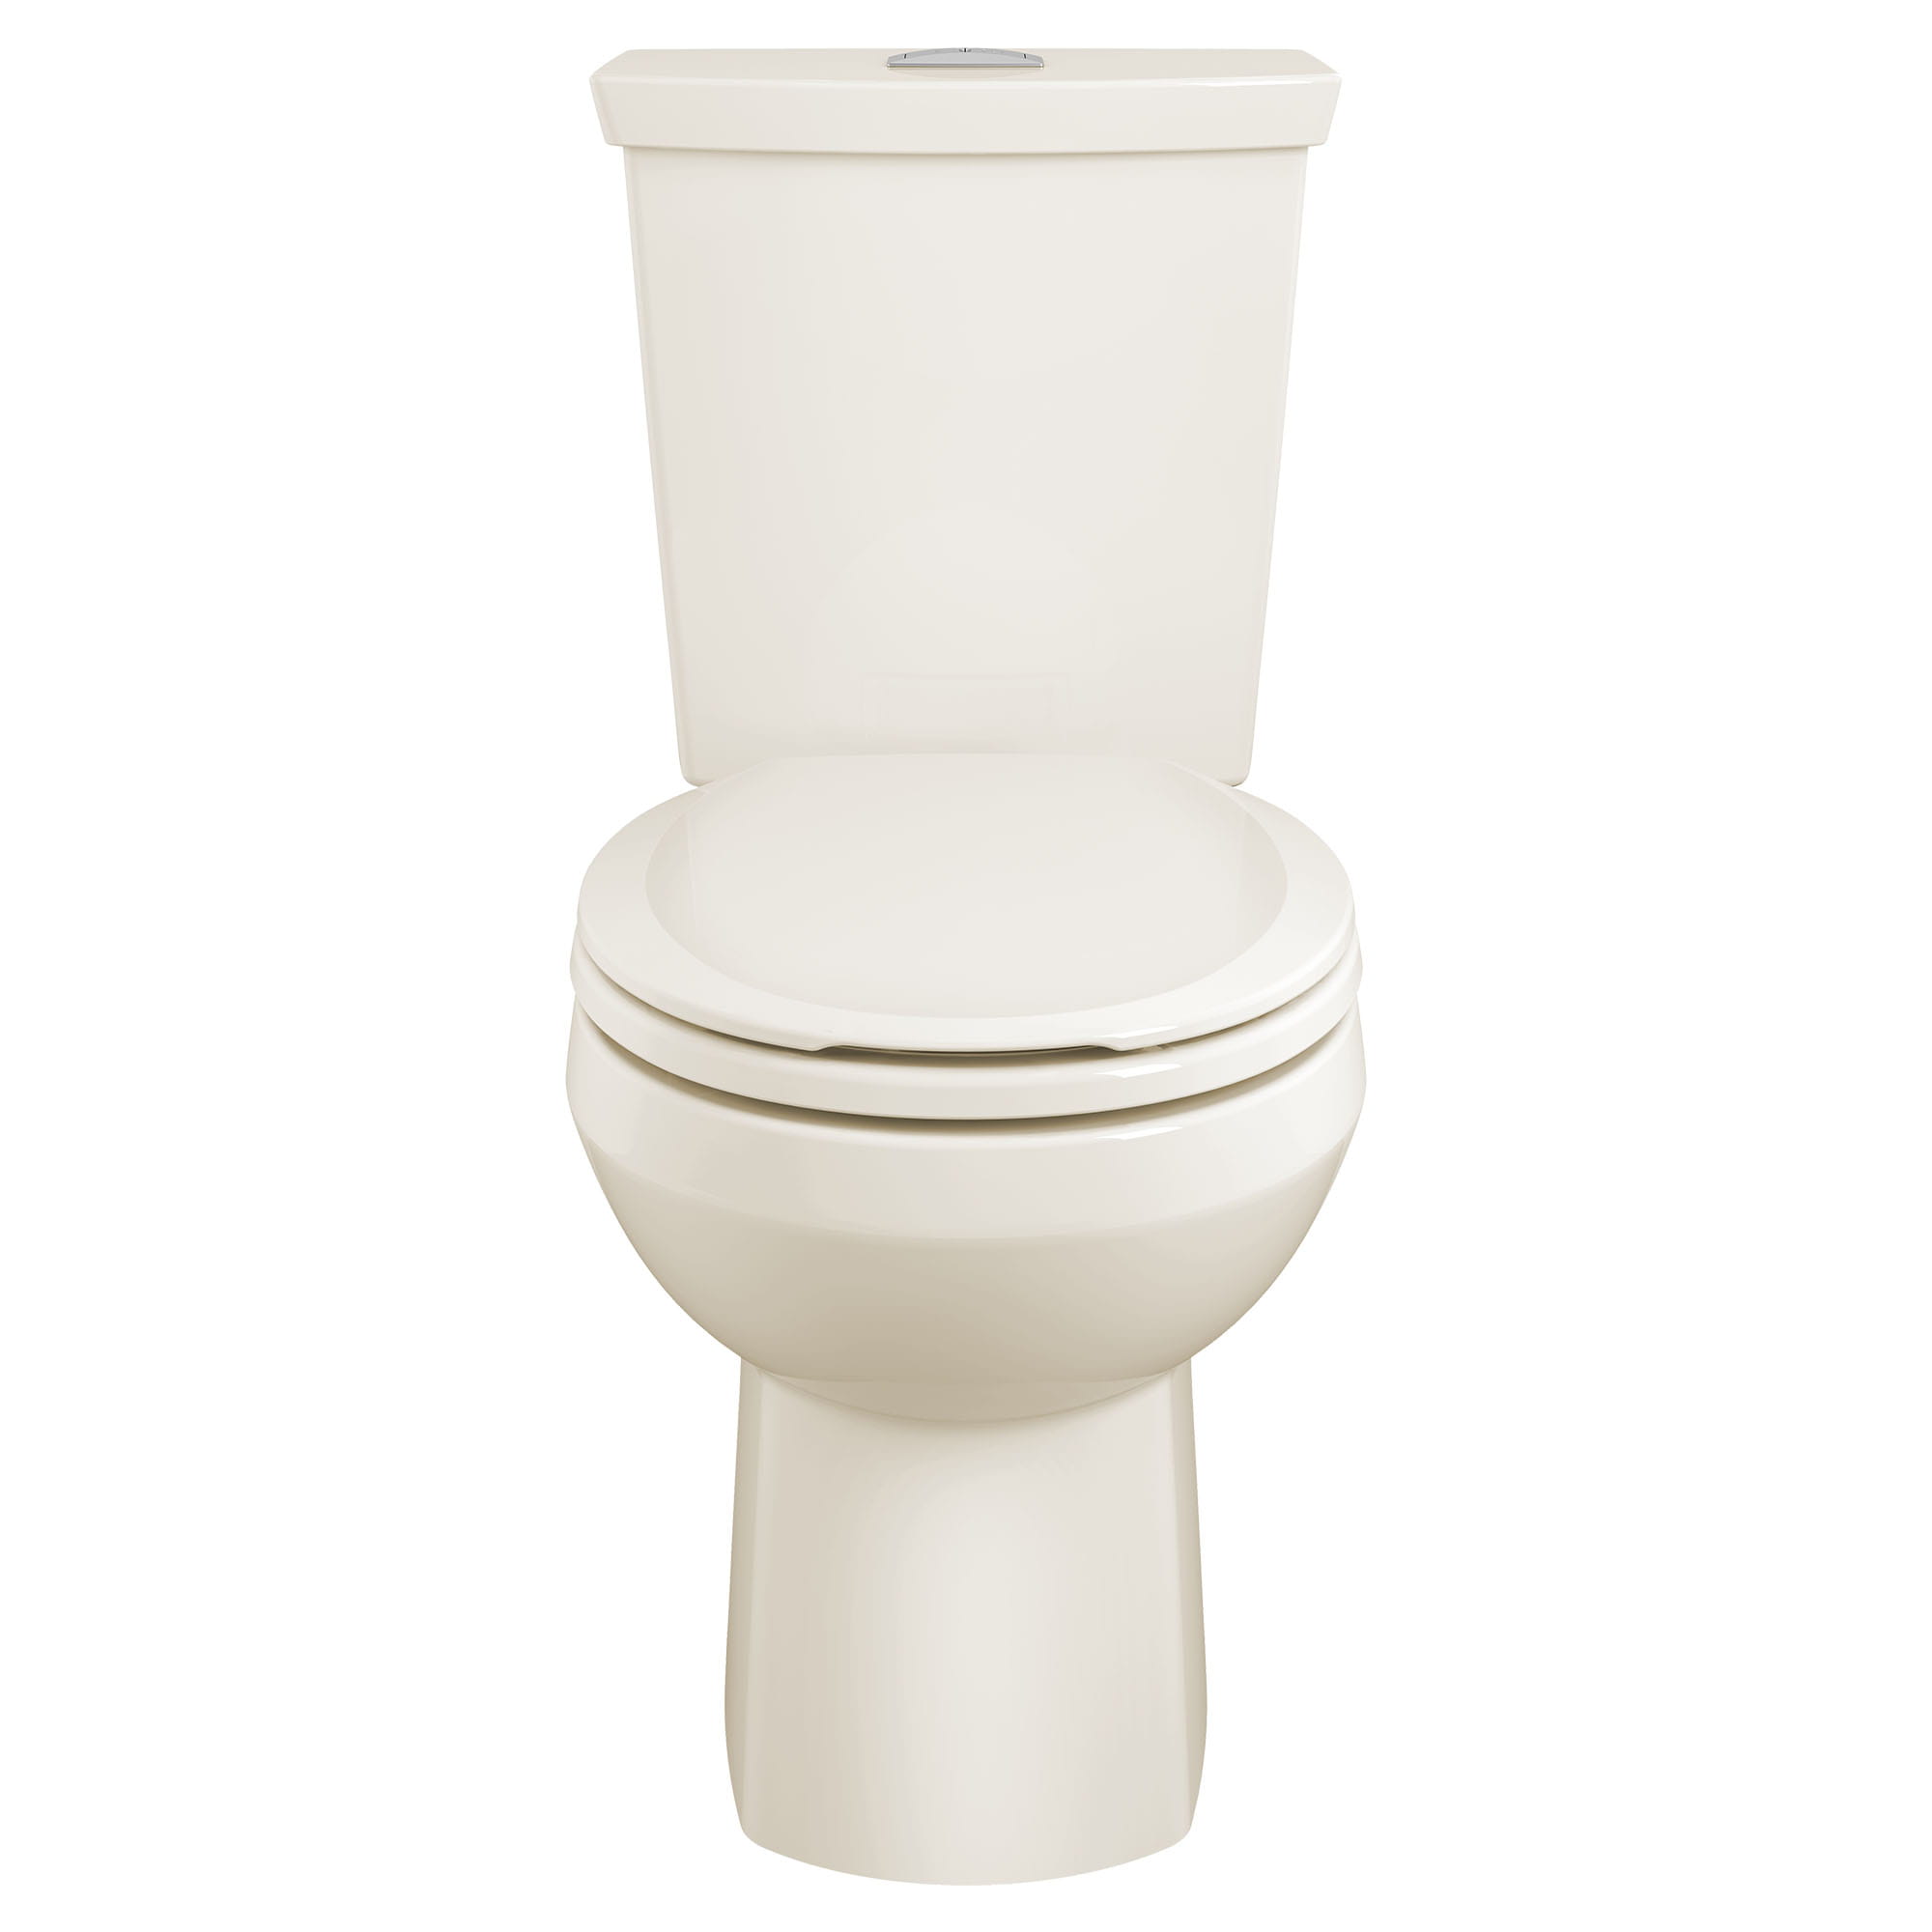 H2Option® Two-Piece Dual Flush 1.28 gpf/4.8 Lpf and 0.92 gpf/3.5 Lpf Standard Height Round Front Toilet With Liner Less Seat